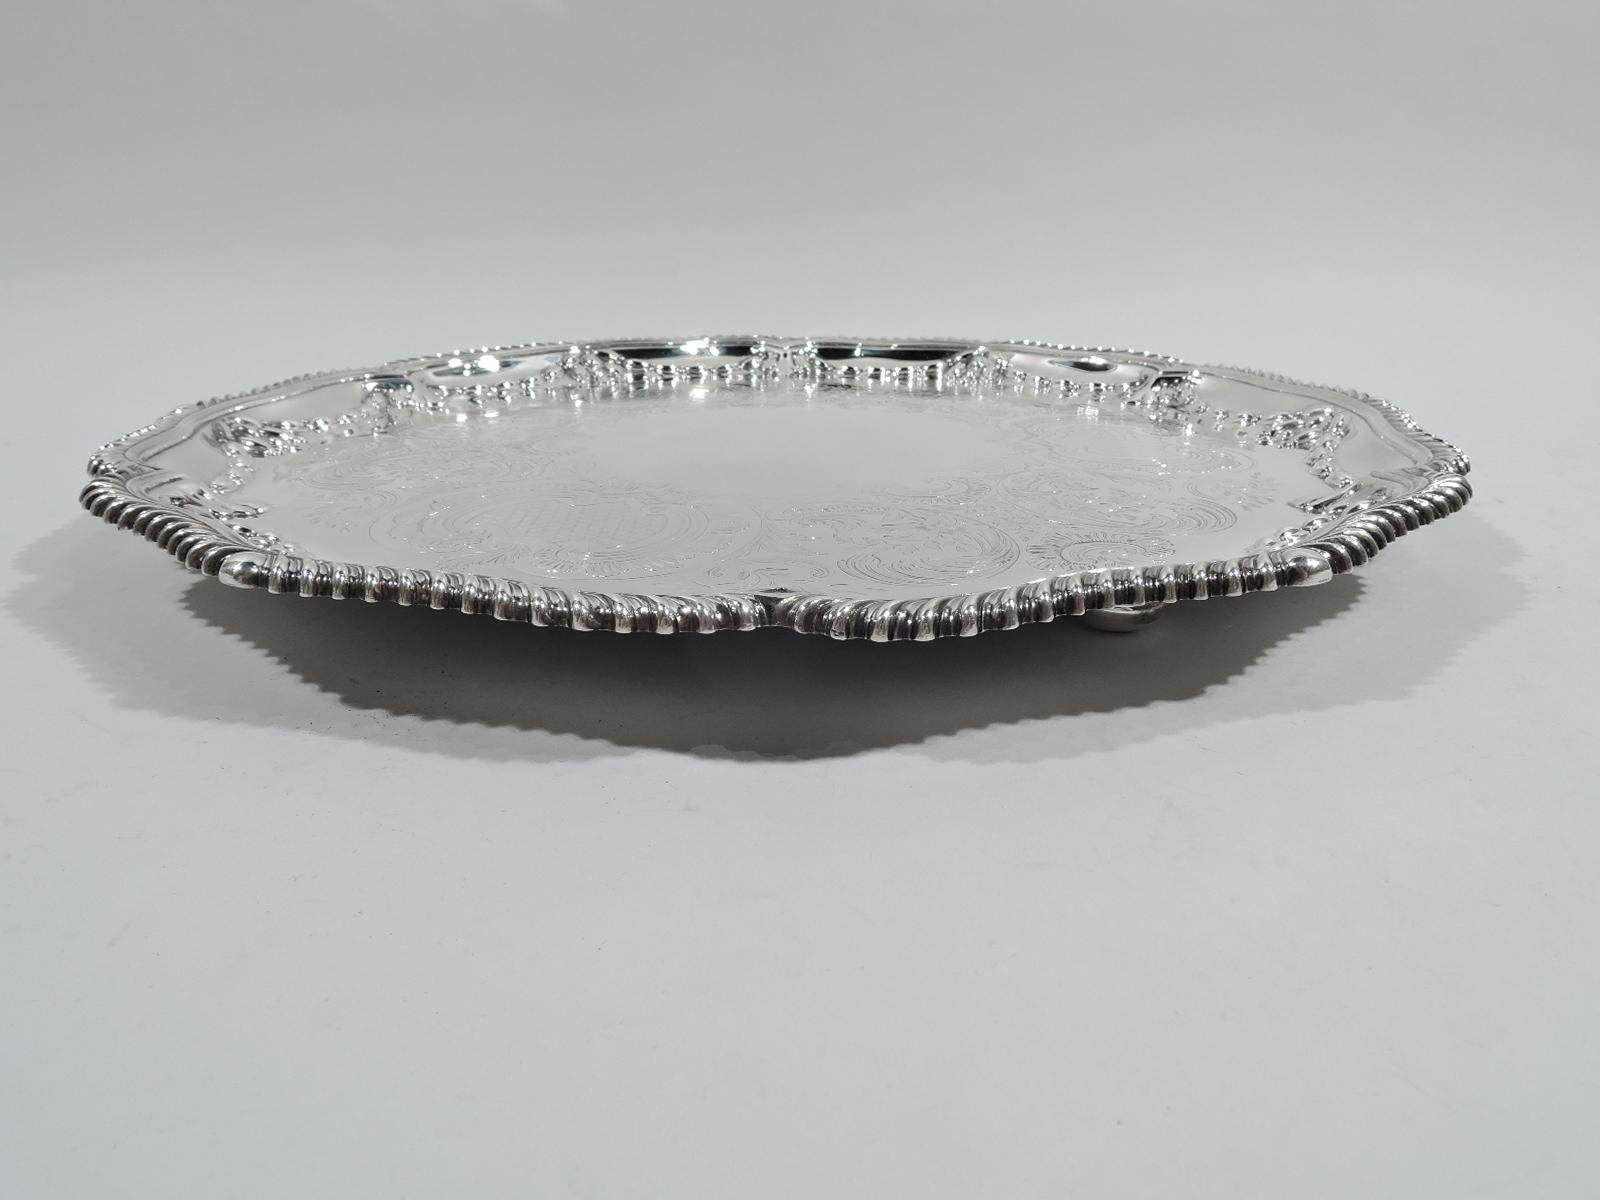 Victorian Georgian sterling silver salver. Made by Elkington in Birmingham in 1900. Well has vacant center surrounded by beautifully engraved scrolls, leaves, and flowers. Applied bud and seed garland interspersed with scallop shells on shoulder.